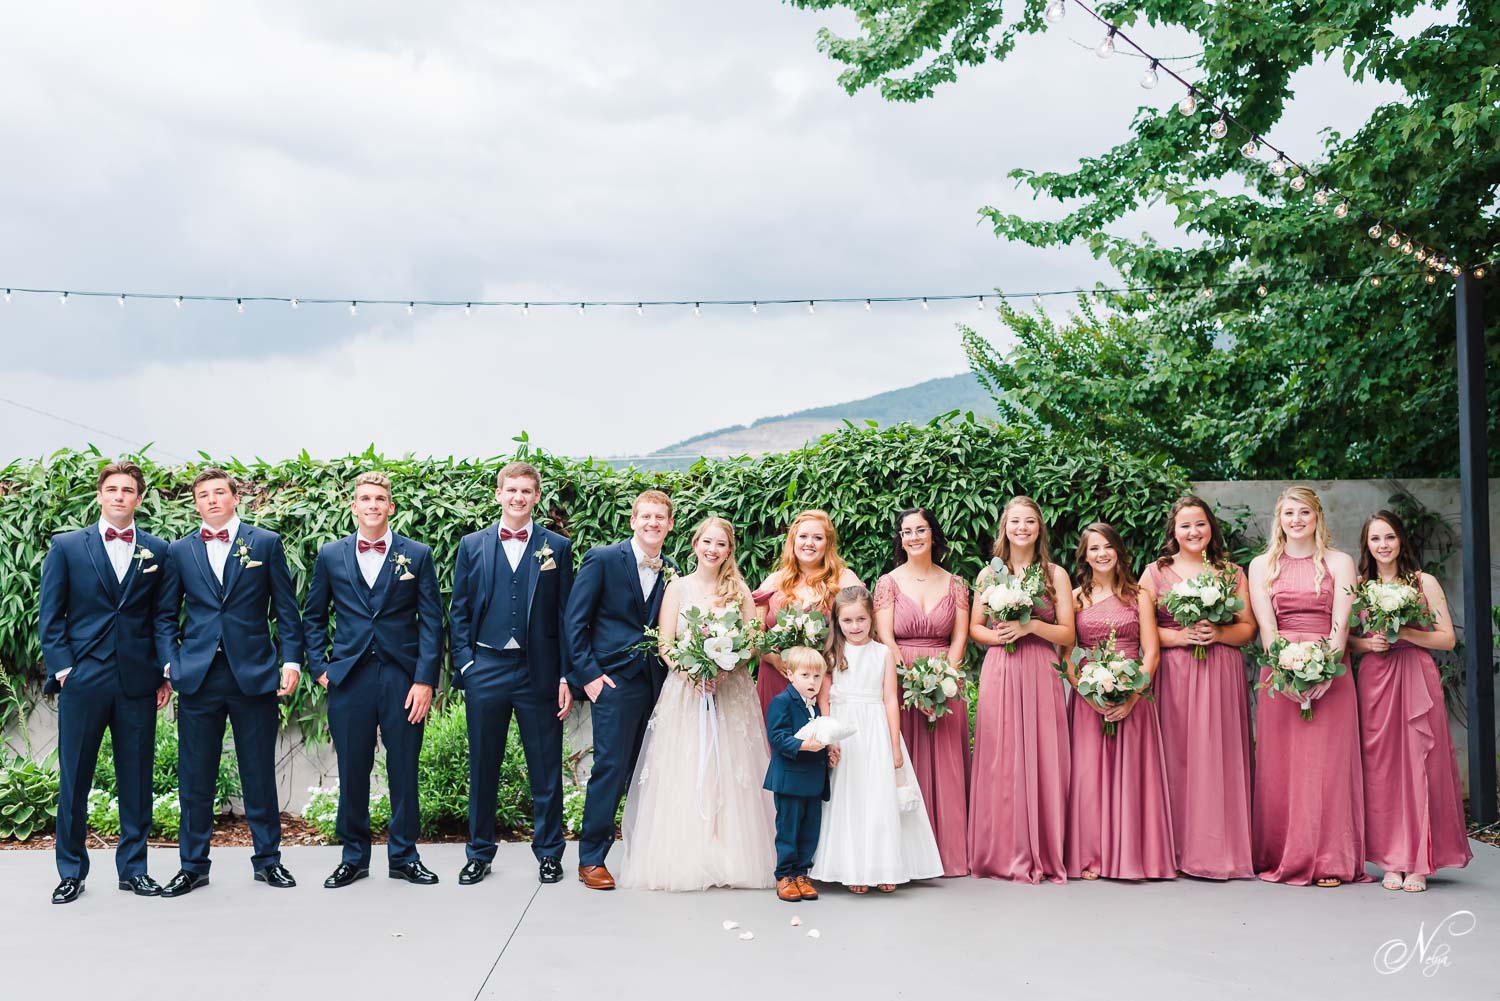 wedding party in navy suits and dusty wine dresses outside on a cluody day at the upper patio area at The Venue Chattnaooga in Chattanooga TN